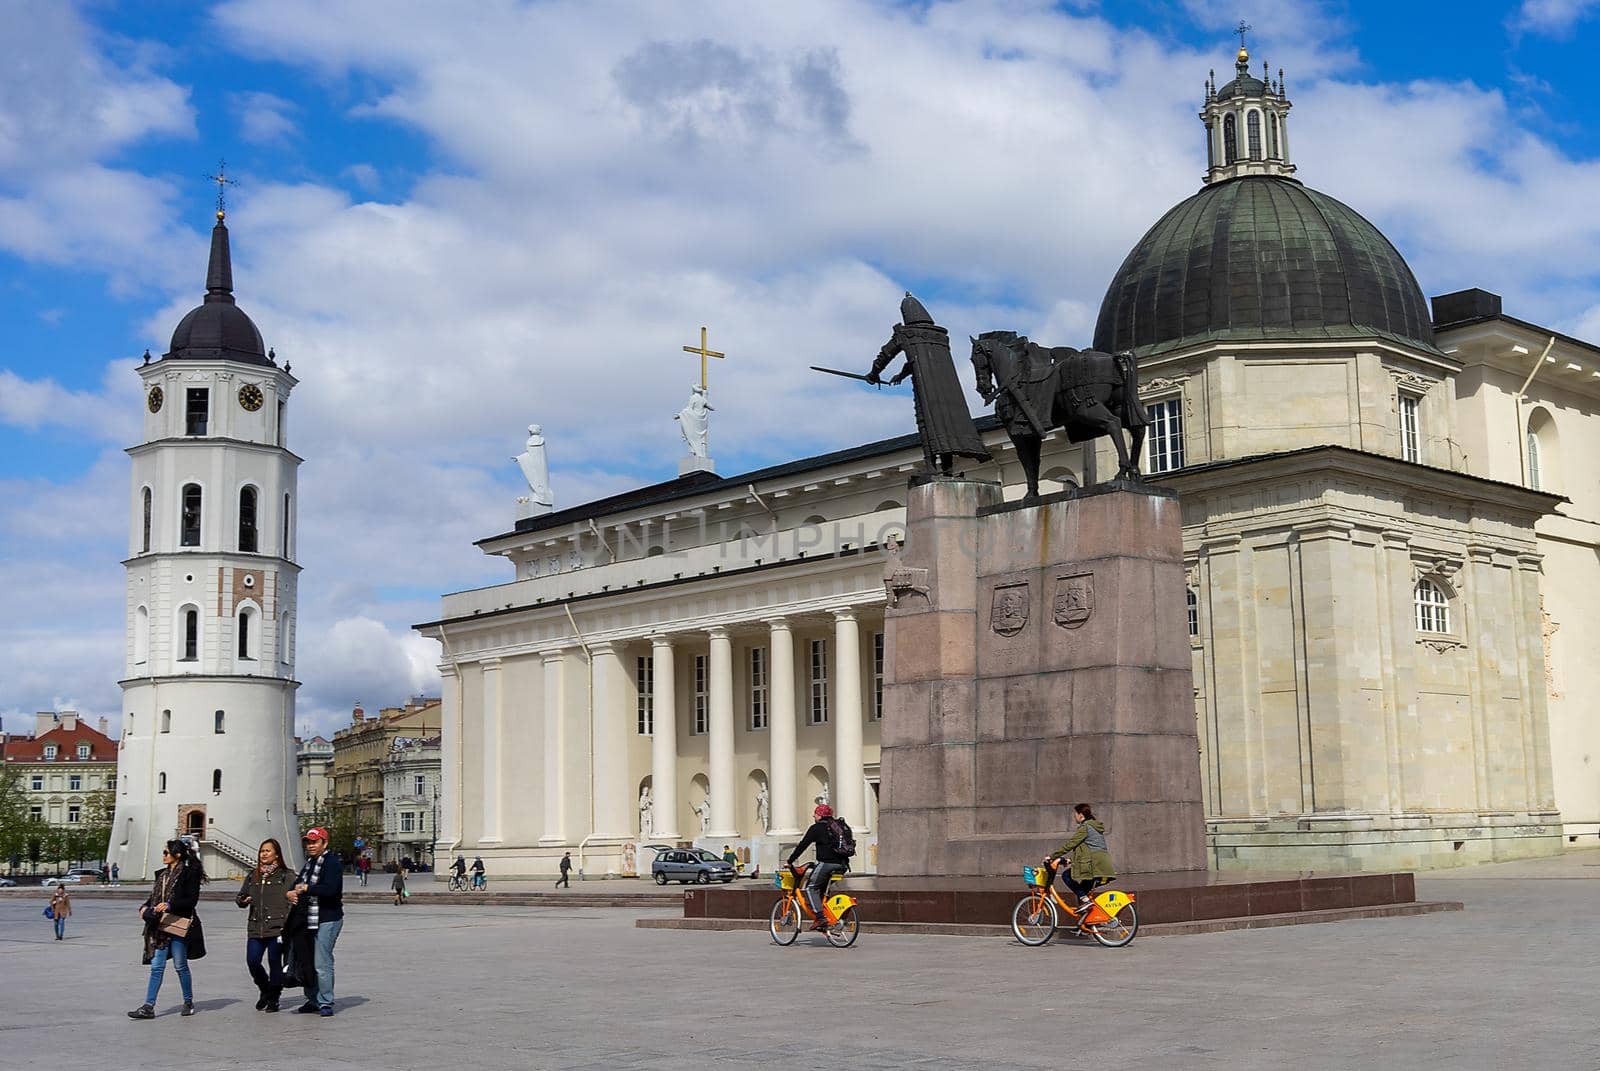 Sights of the Lithuanian capital by fifg